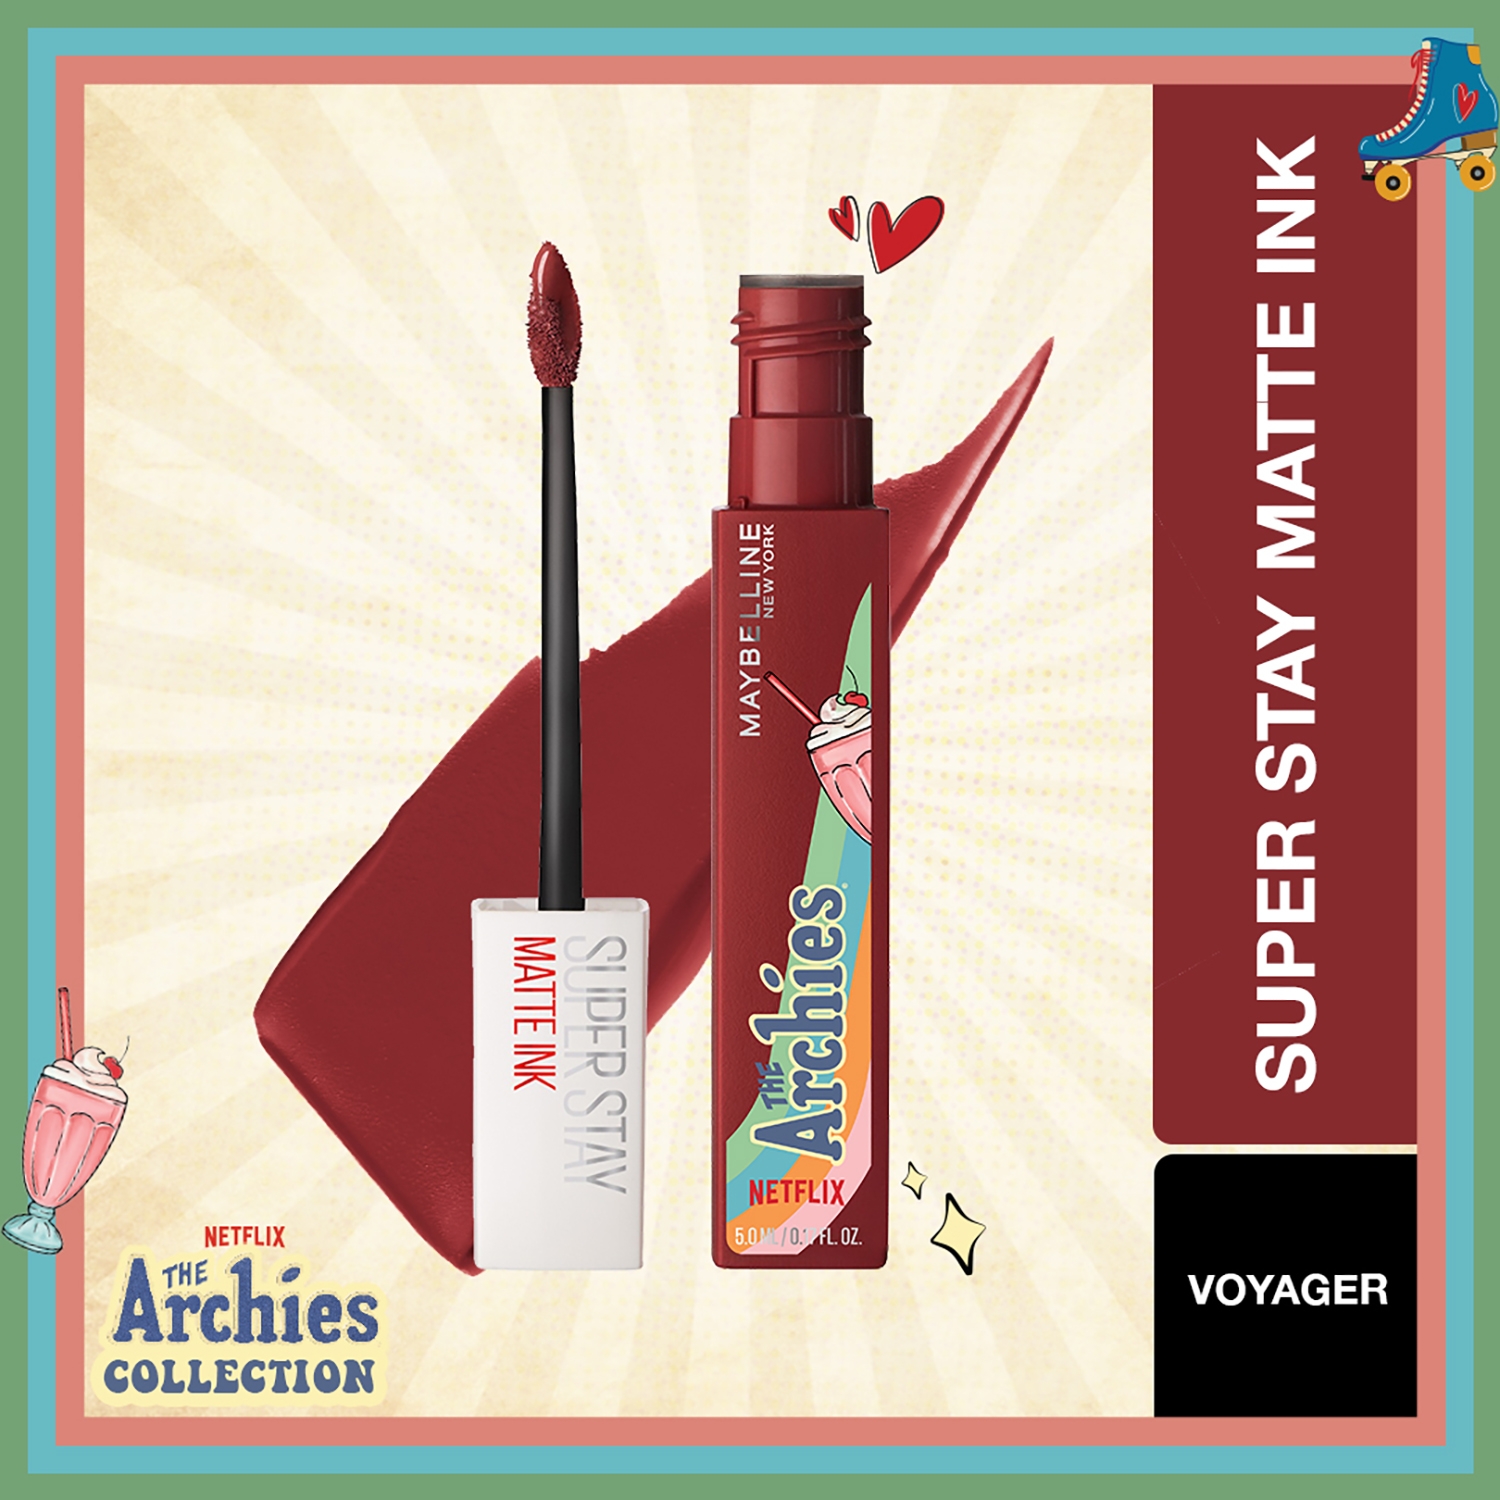 Maybelline New Lipstick Limited Liquid - Matte Ink 120 Artist Super The Stay Archies York Edition